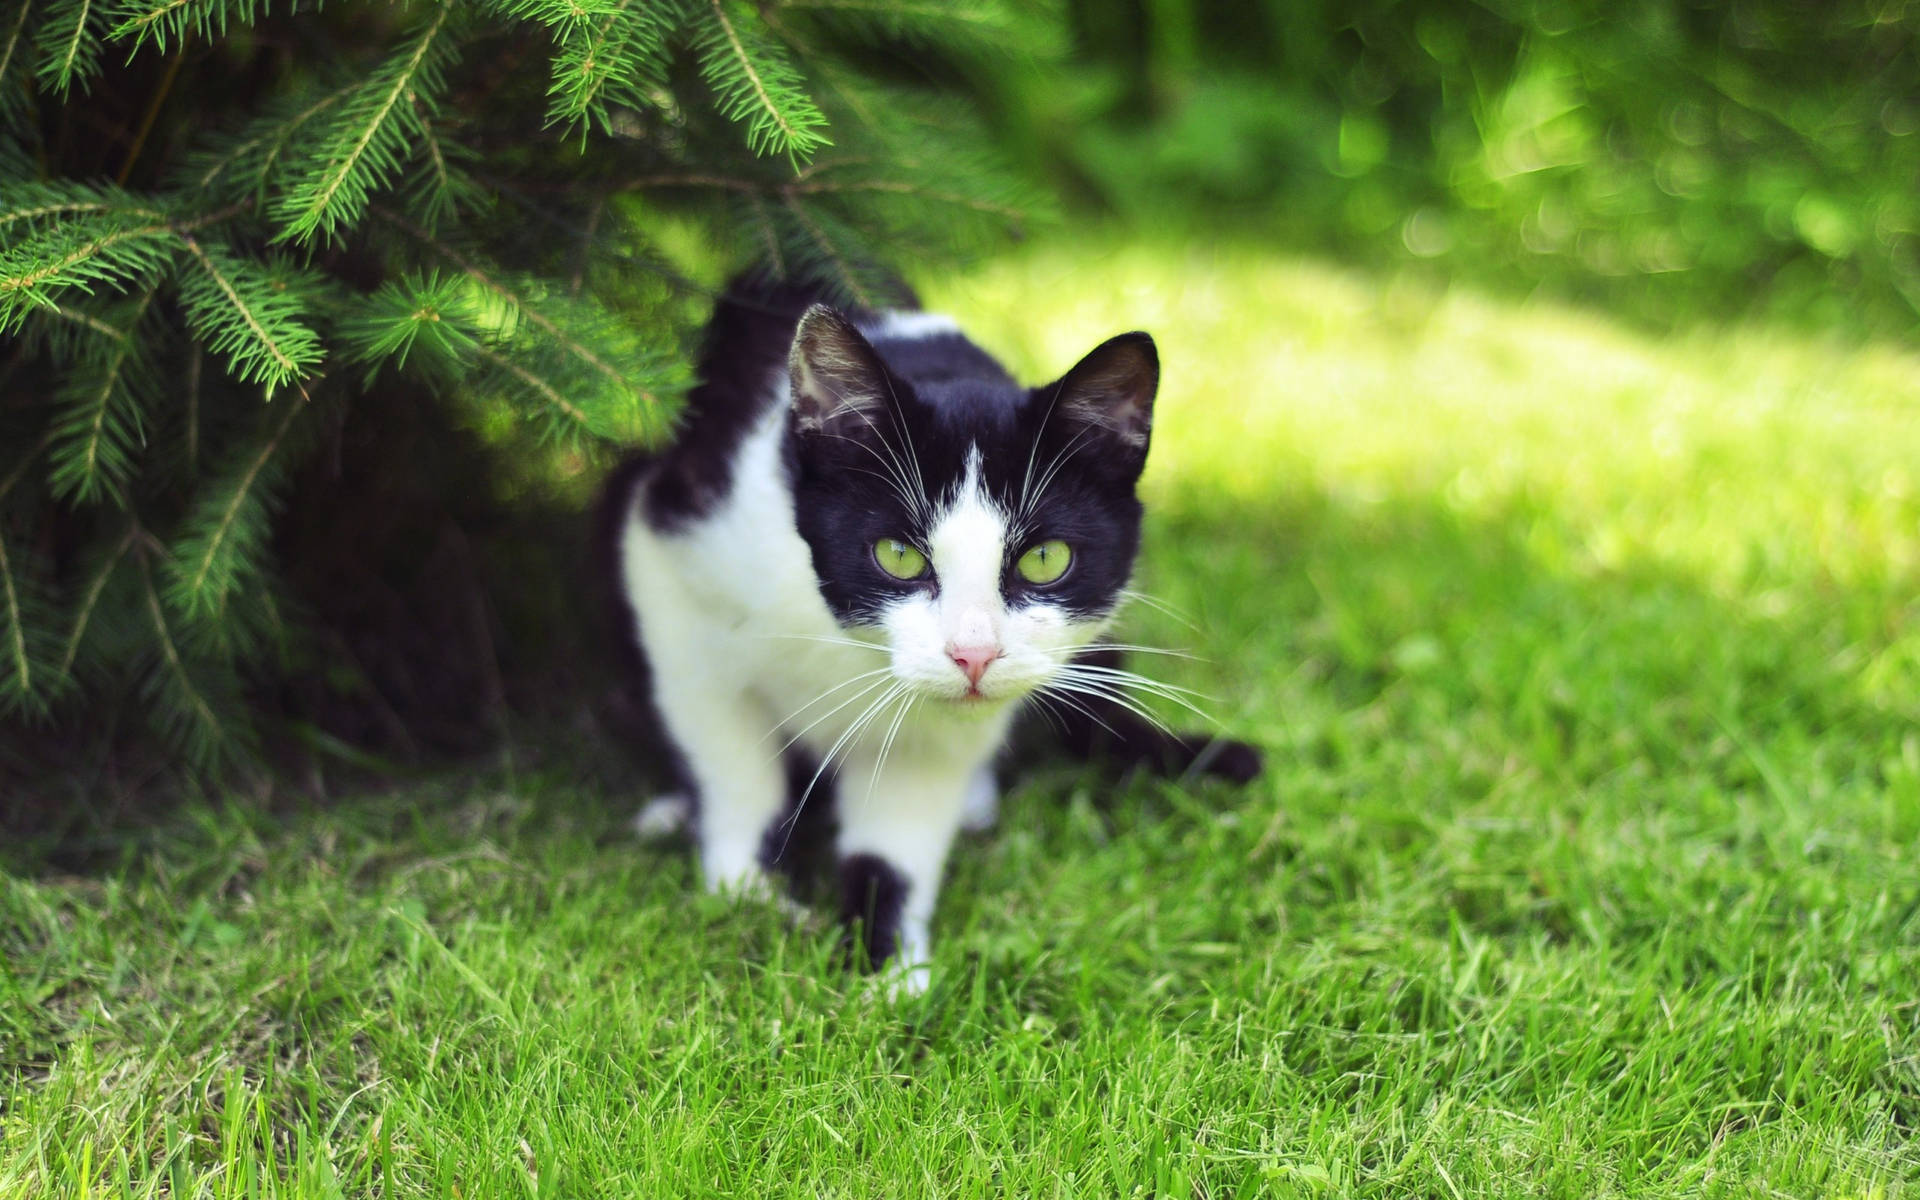 Black And White Cat On The Grass Wallpaper